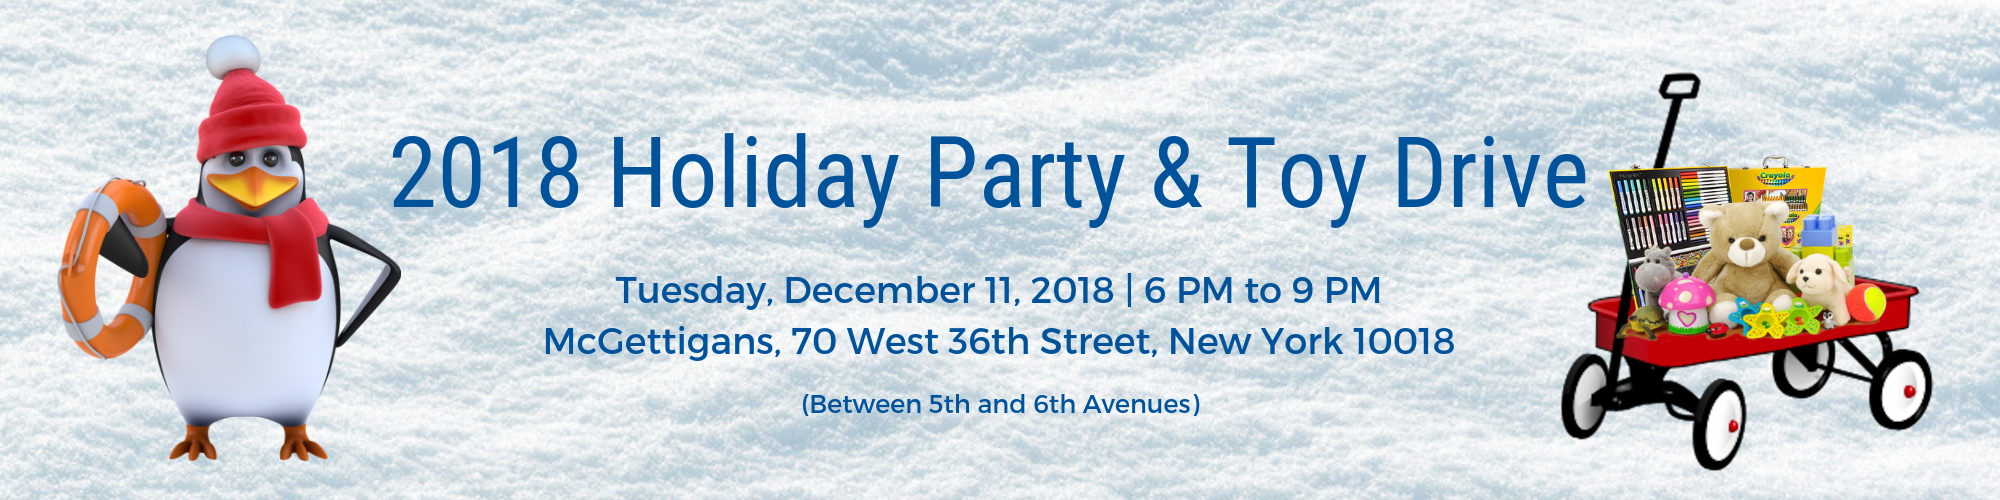 2018 Holiday Party and Toy Drive